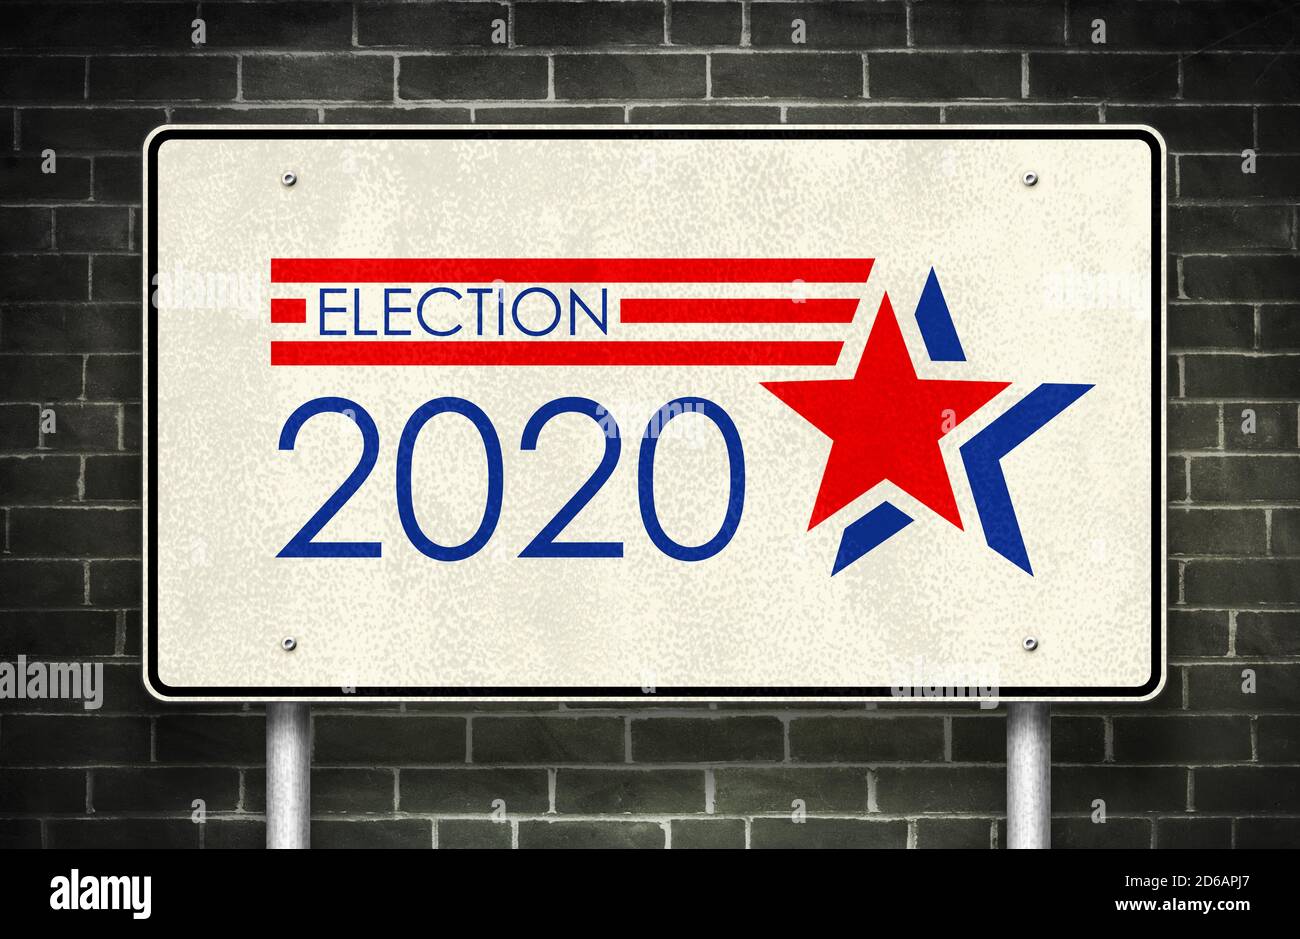 Presidential Election 2020 in the United States Stock Photo